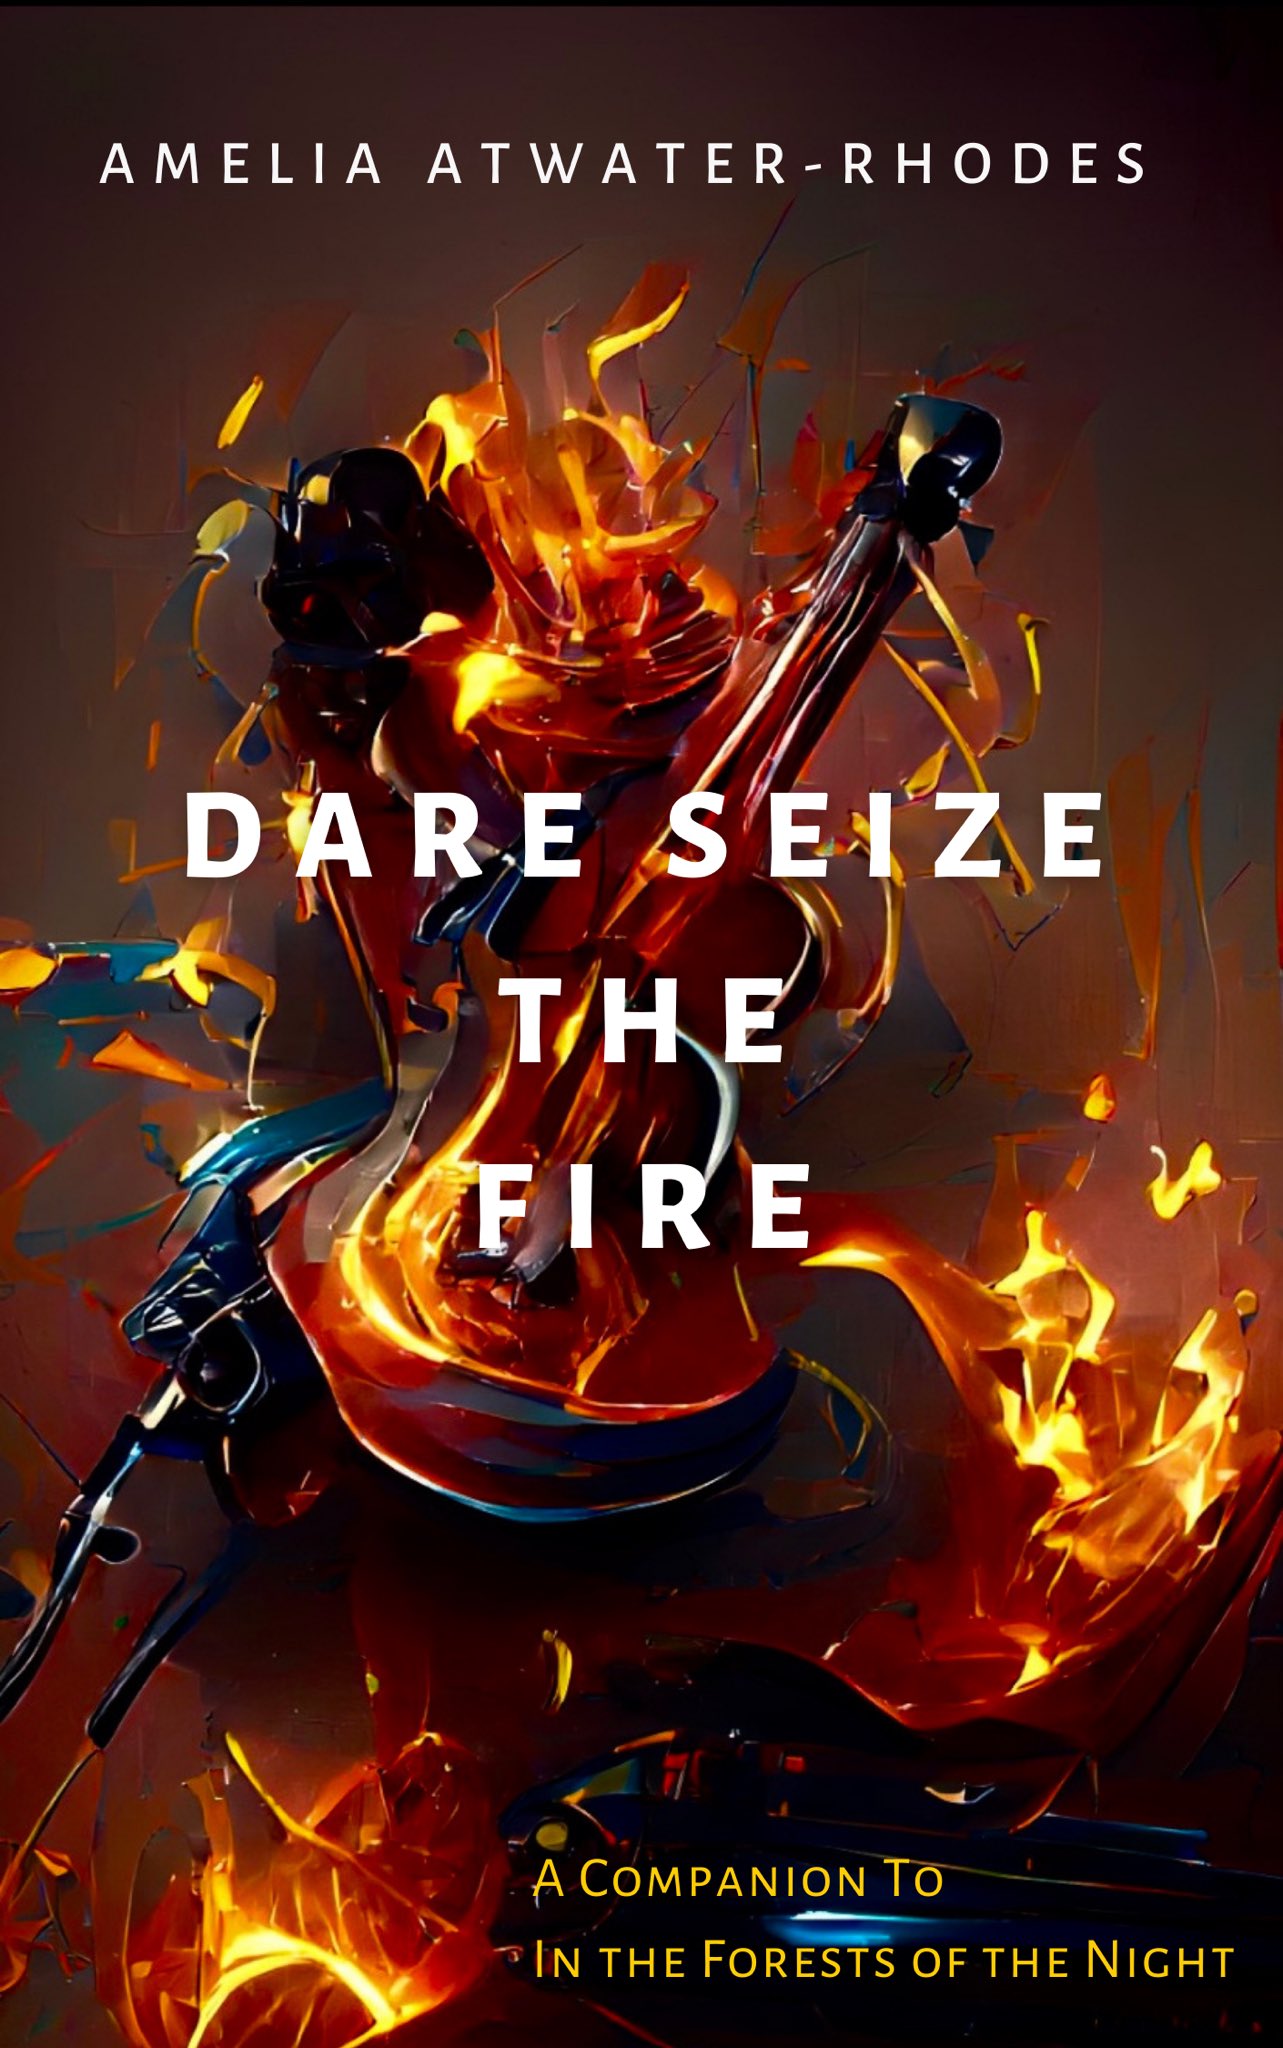 A book cover: Amelia Atwater-Rhodes, Dare Seize the Fire, A Companion to In the Forests of the Night. The image is a somewhat-abstract image of a violin set on a backdrop of fire.